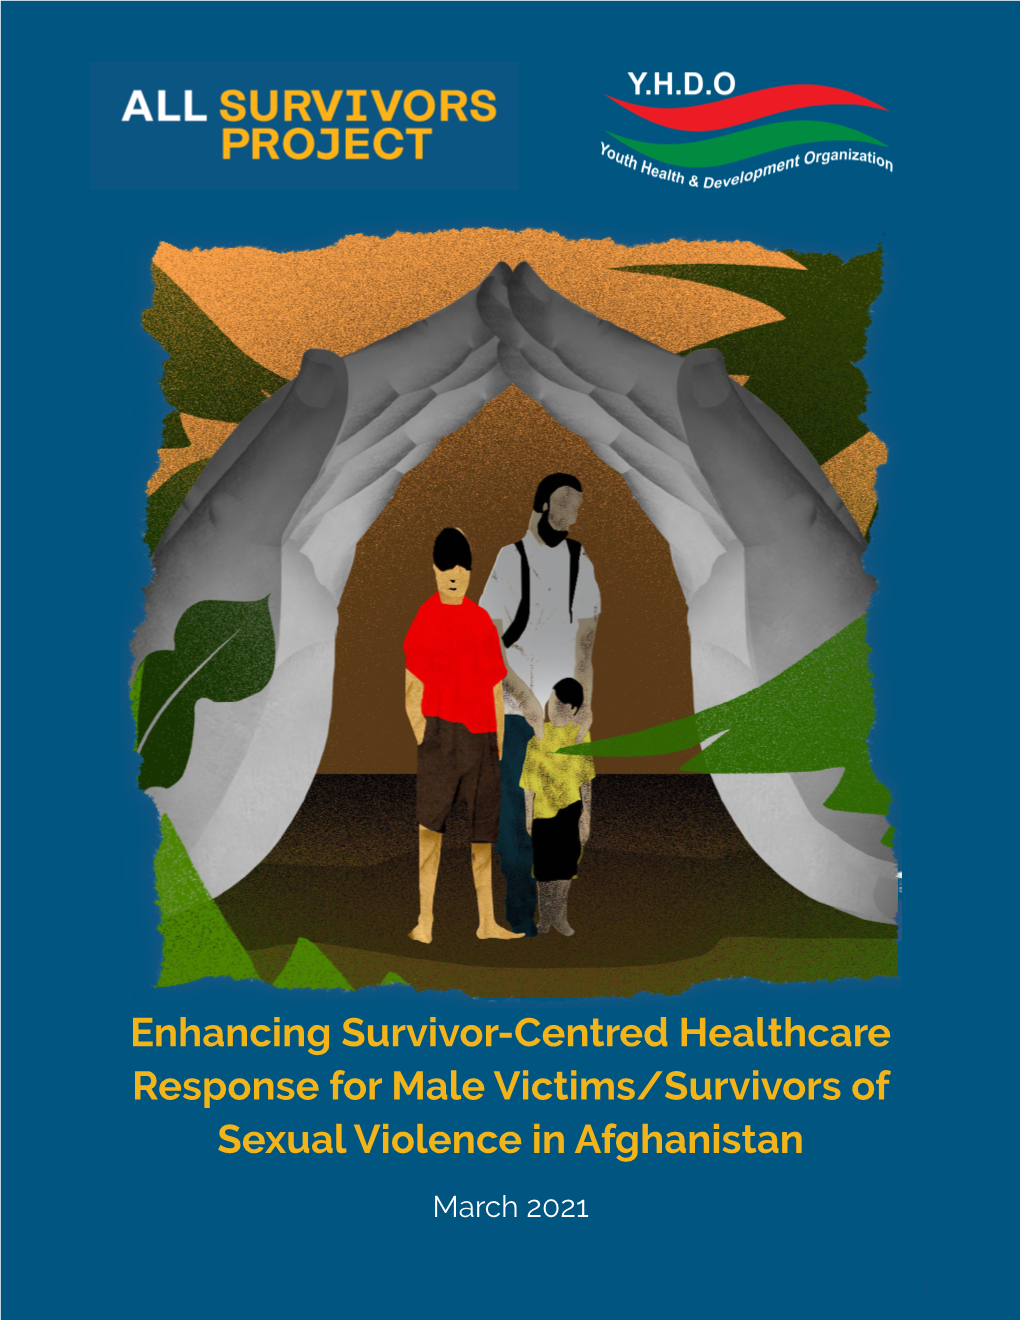 Enhancing Survivor-Centred Healthcare Response for Male Victims/Survivors of Sexual Violence in Afghanistan